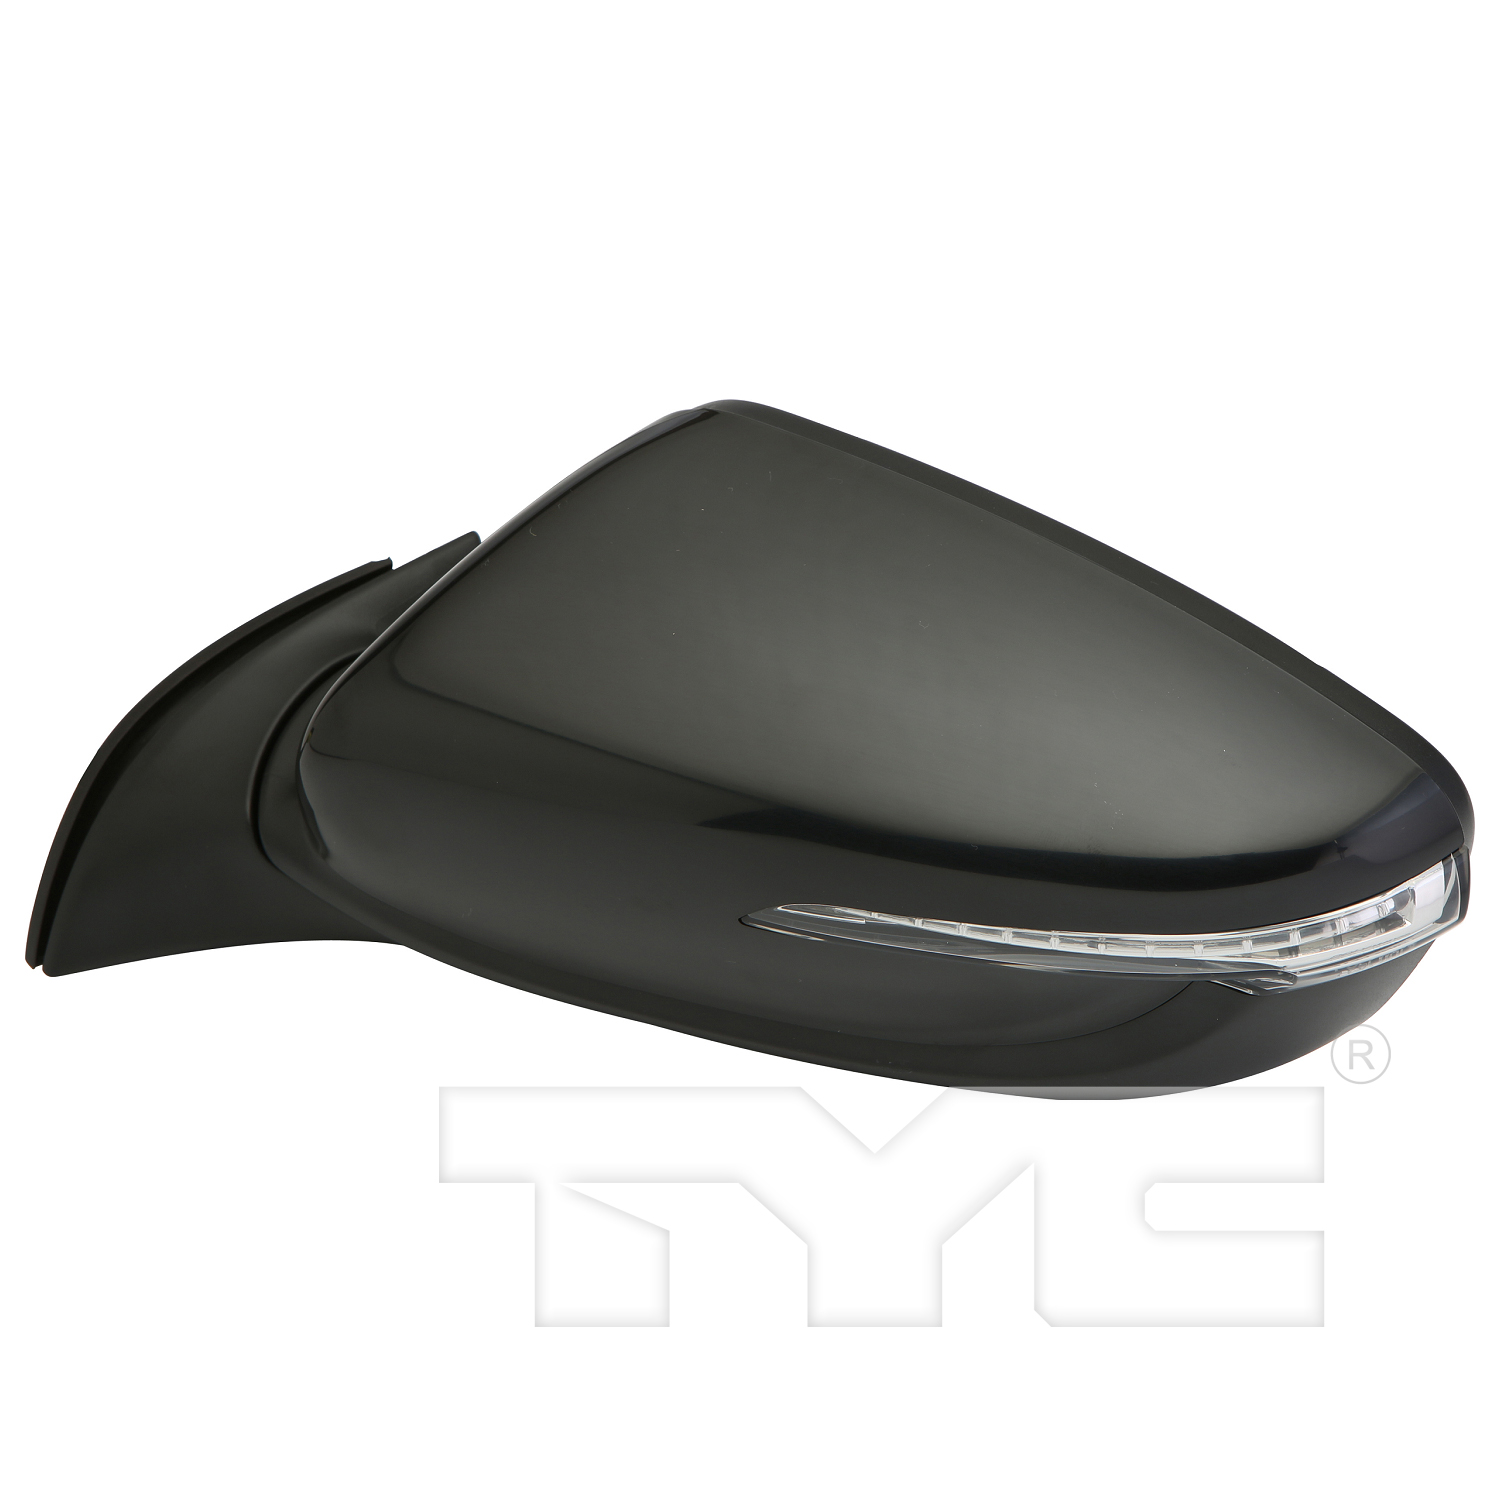 Aftermarket MIRRORS for KIA - FORTE, FORTE,17-18,LT Mirror outside rear view